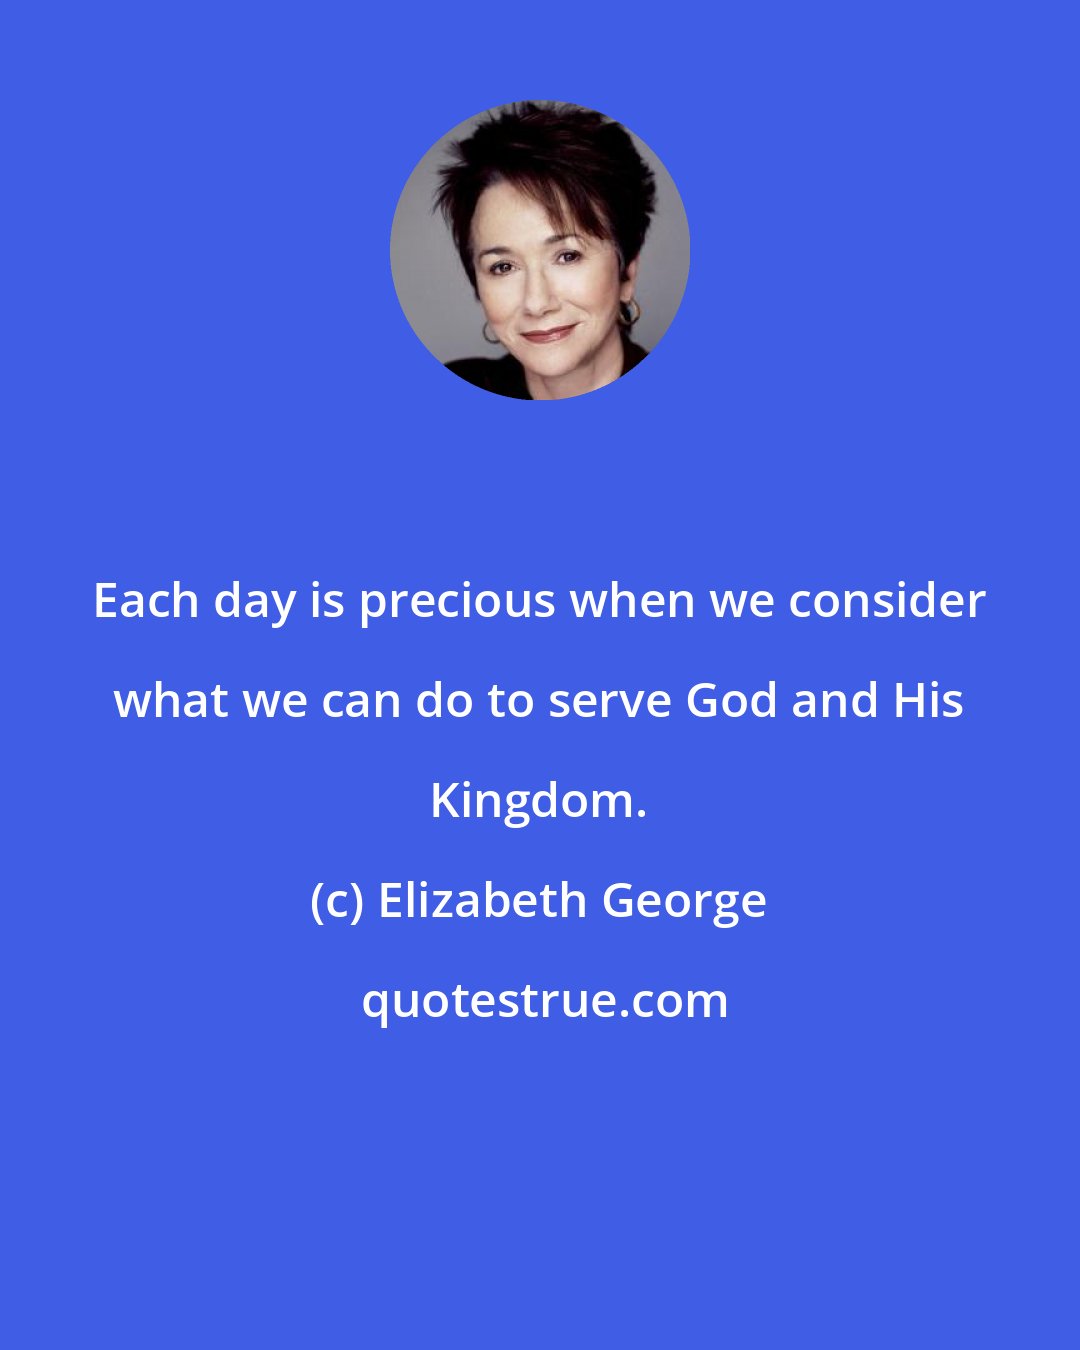 Elizabeth George: Each day is precious when we consider what we can do to serve God and His Kingdom.